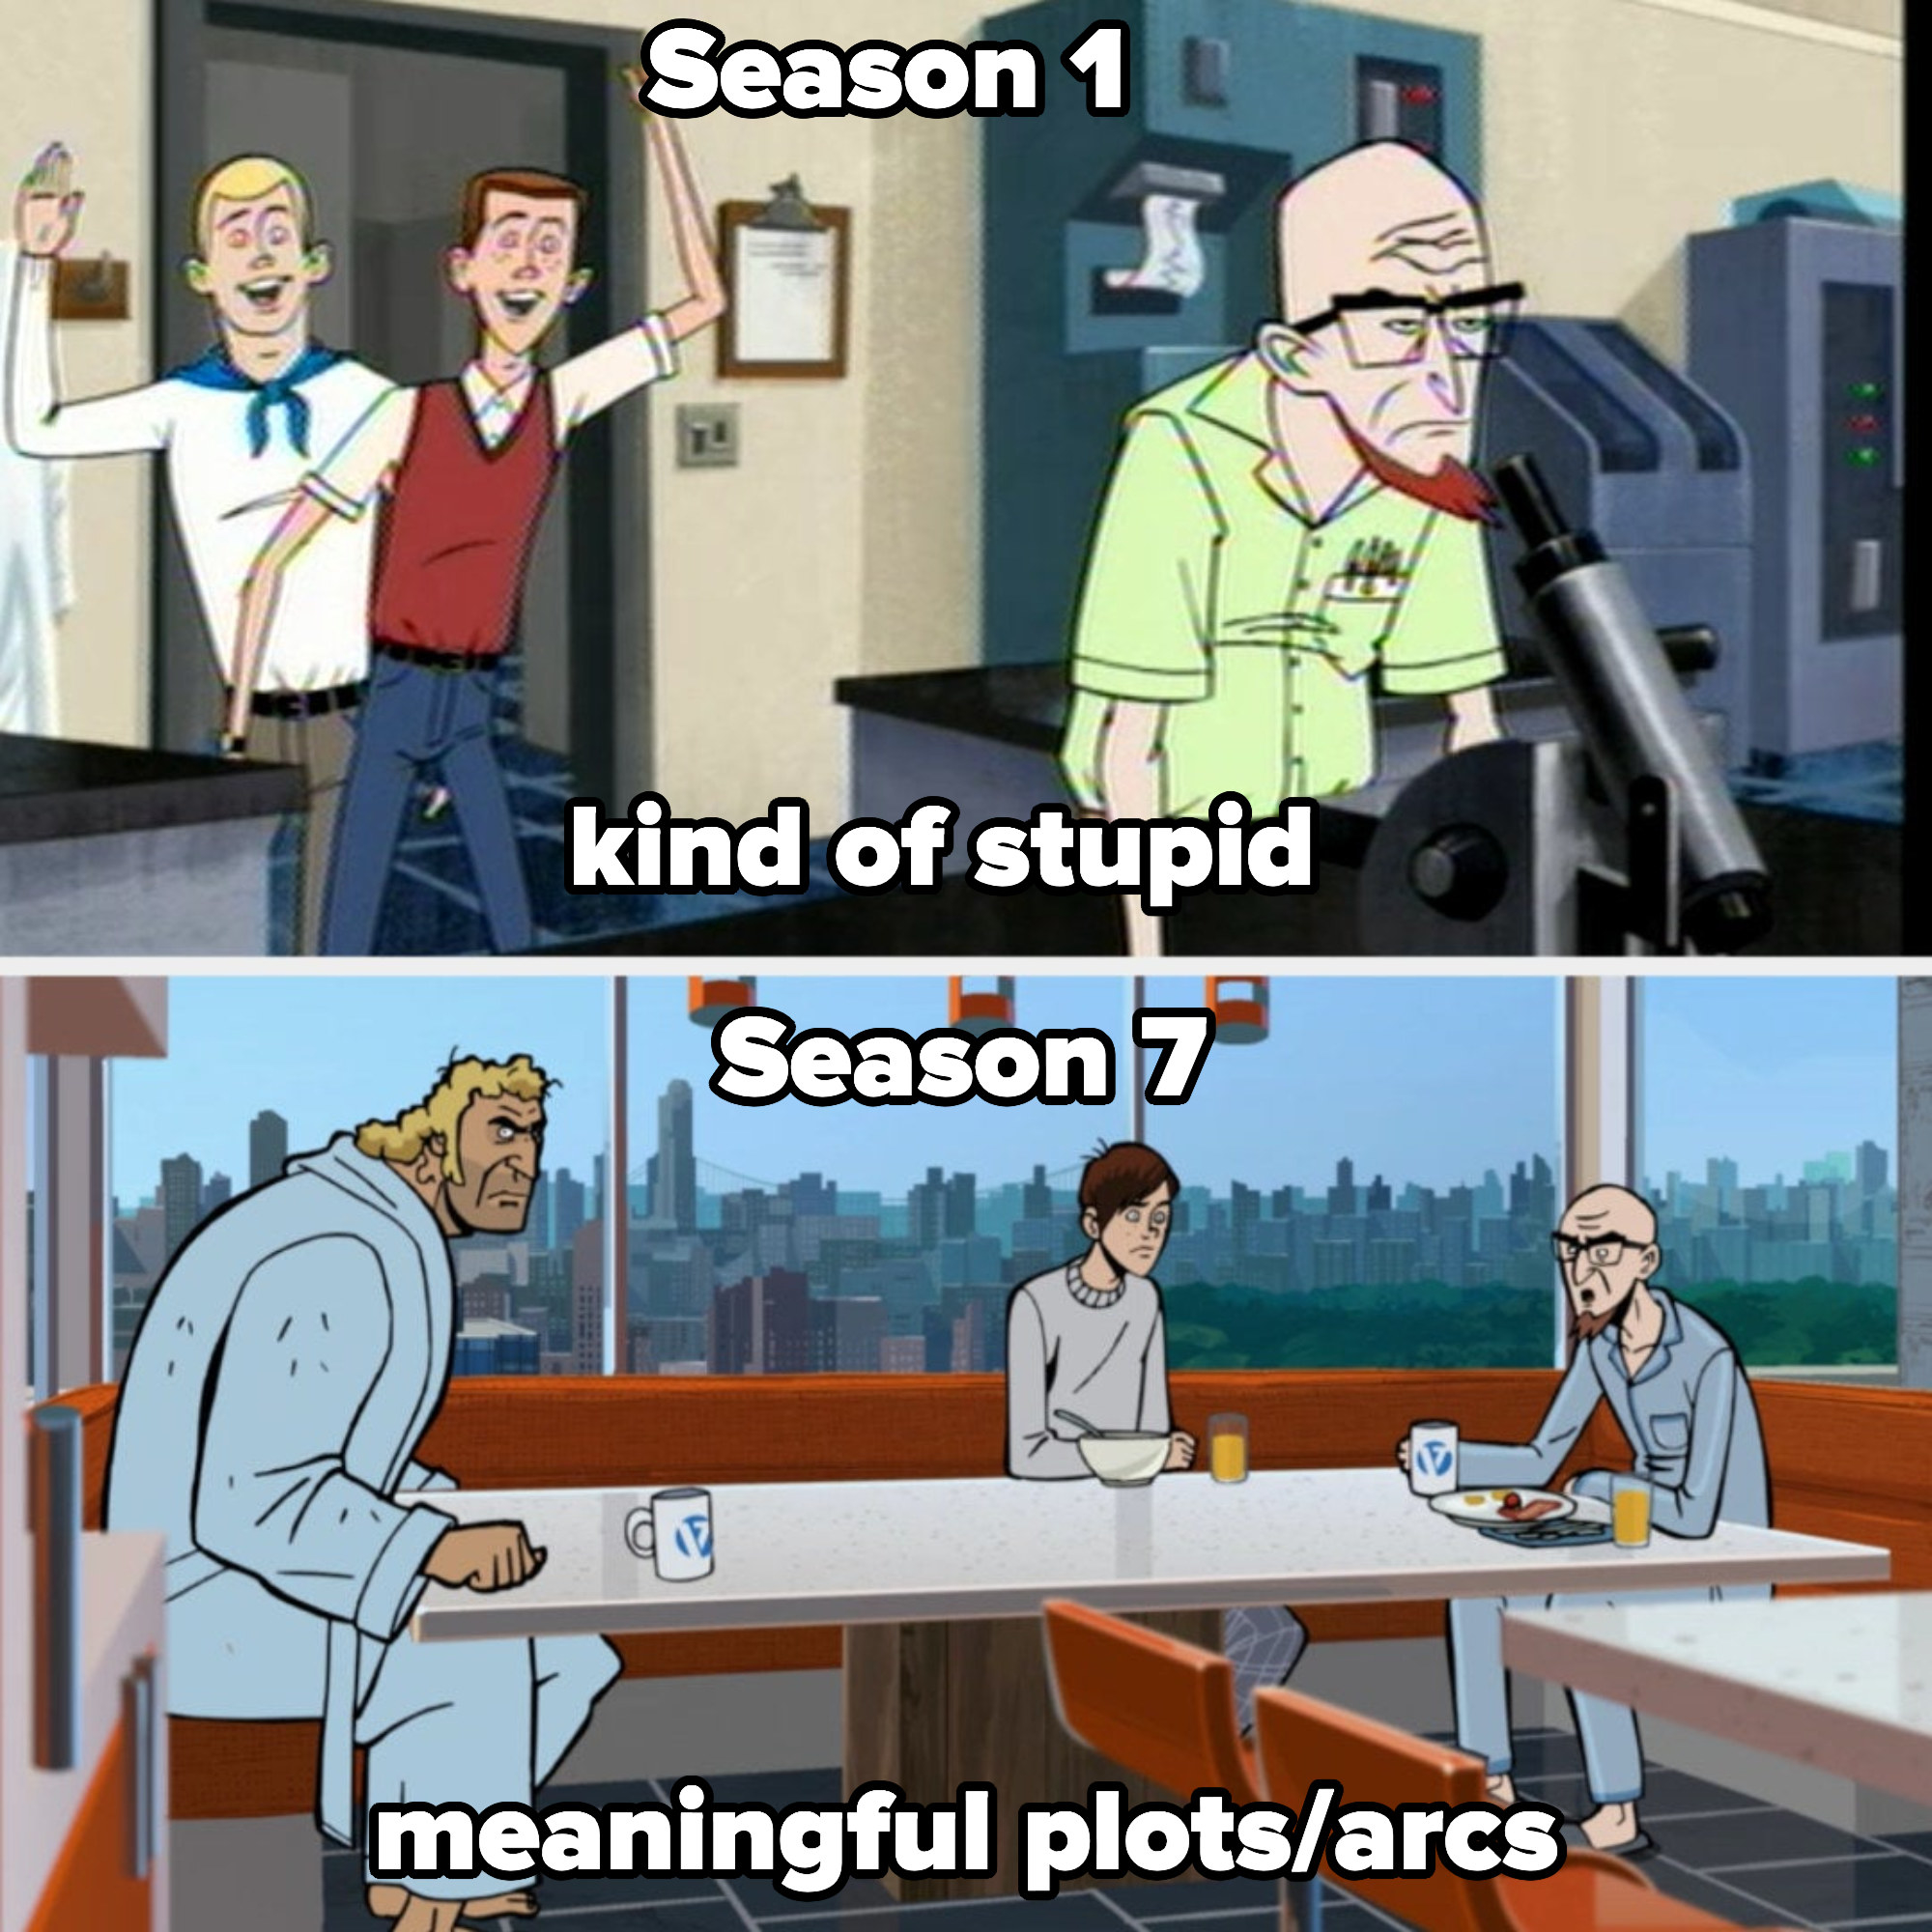 season 1 labeled &quot;kind of stupid&quot; and season 7 labeled &quot;meaningful plots/arcs&quot;